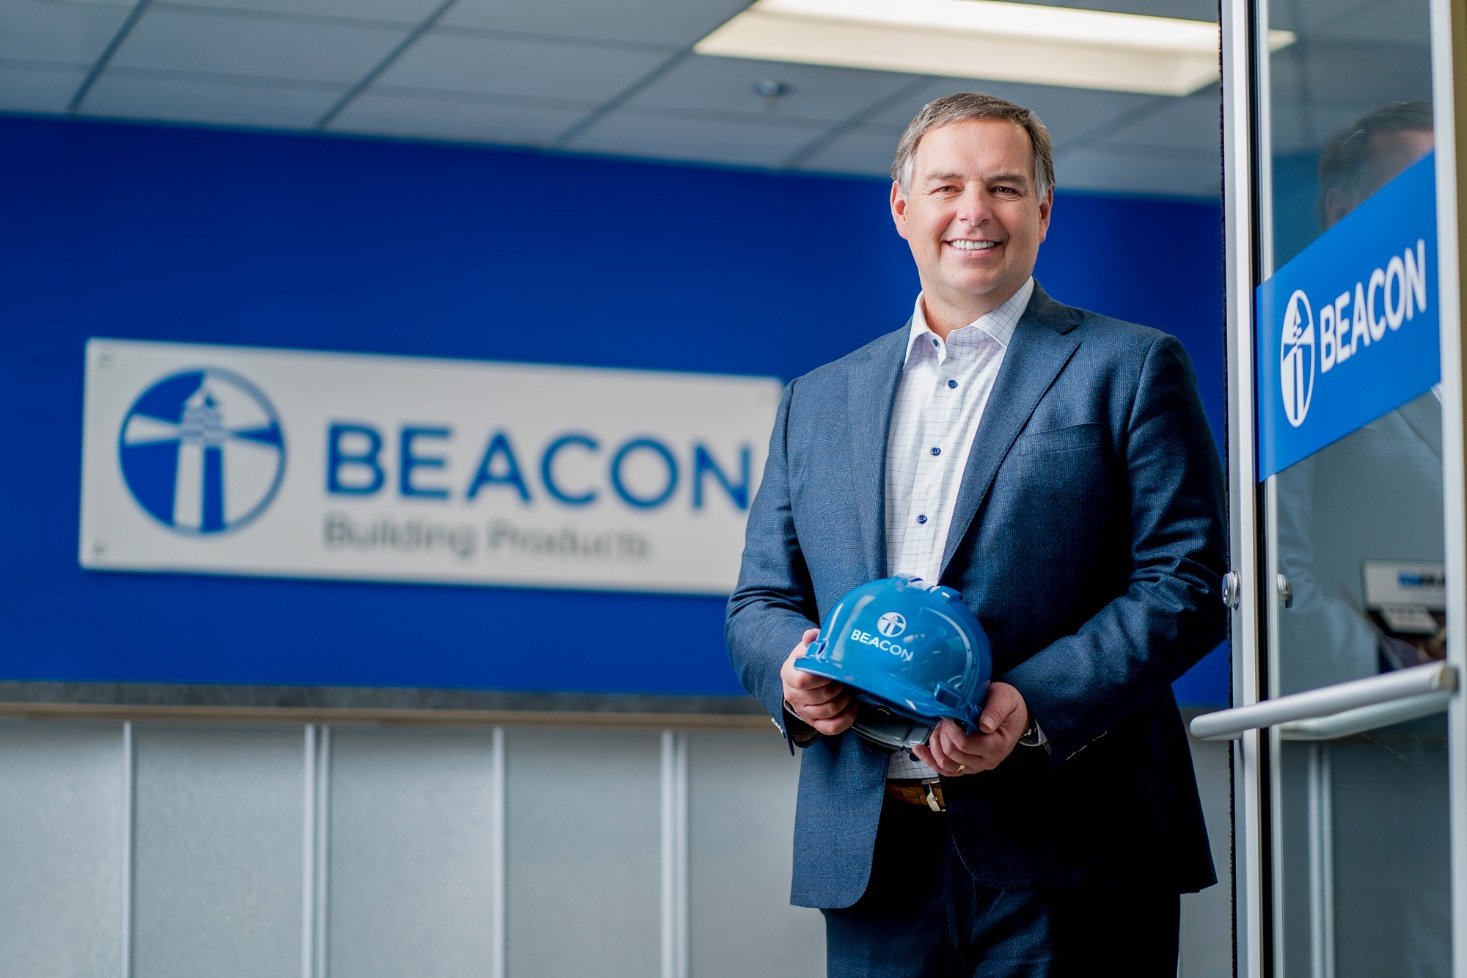 Julian Francis, President and CEO of Beacon Building Products